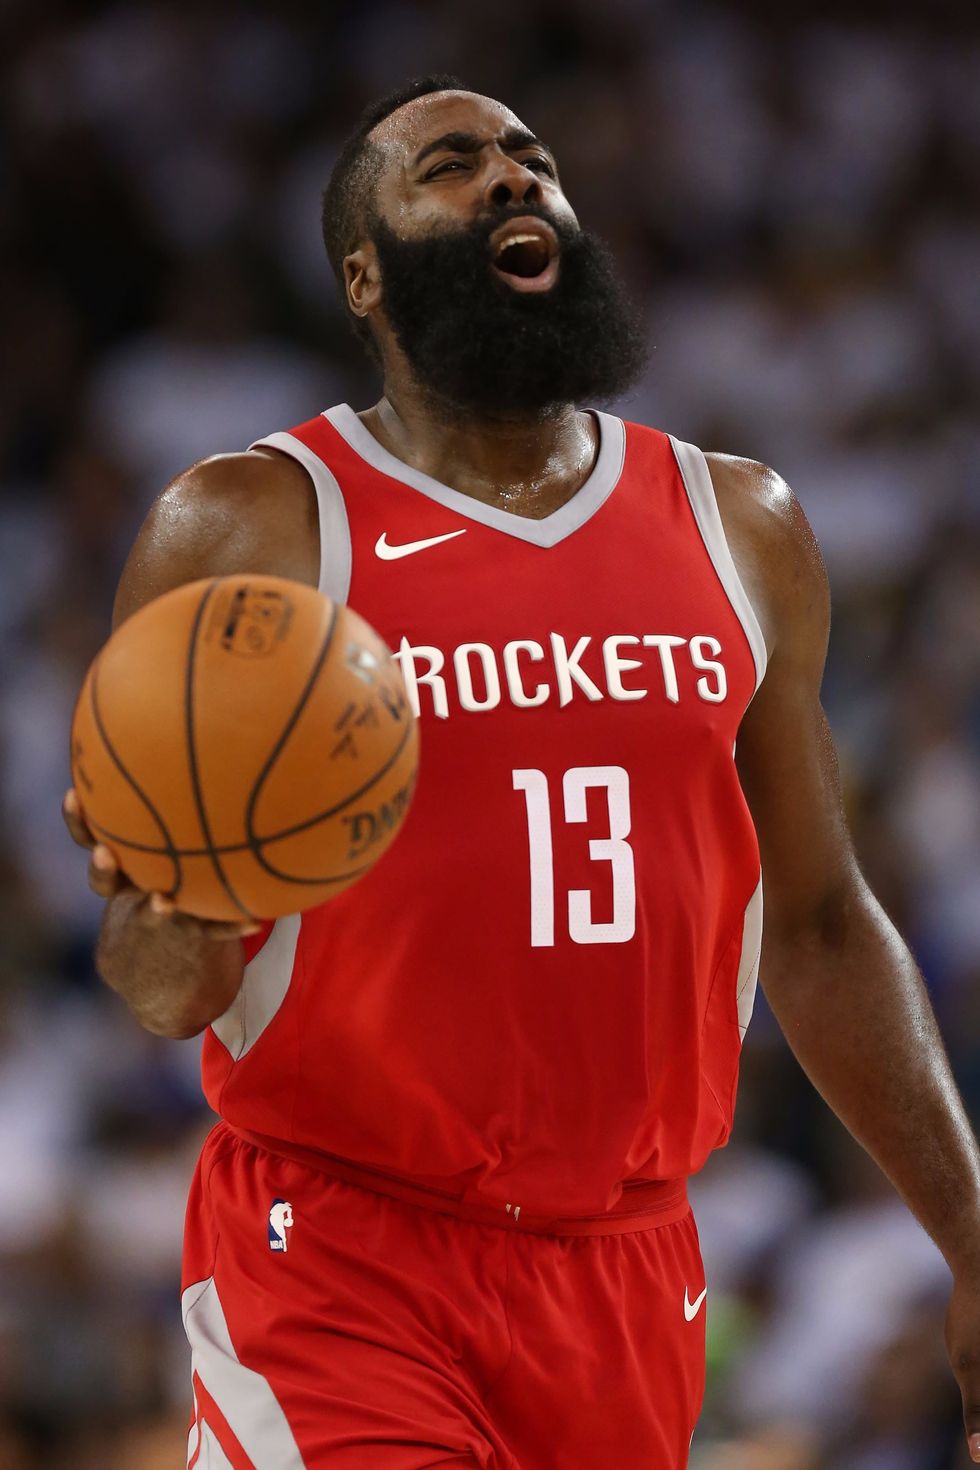 With injuries mounting, Rockets win streak ends at 14